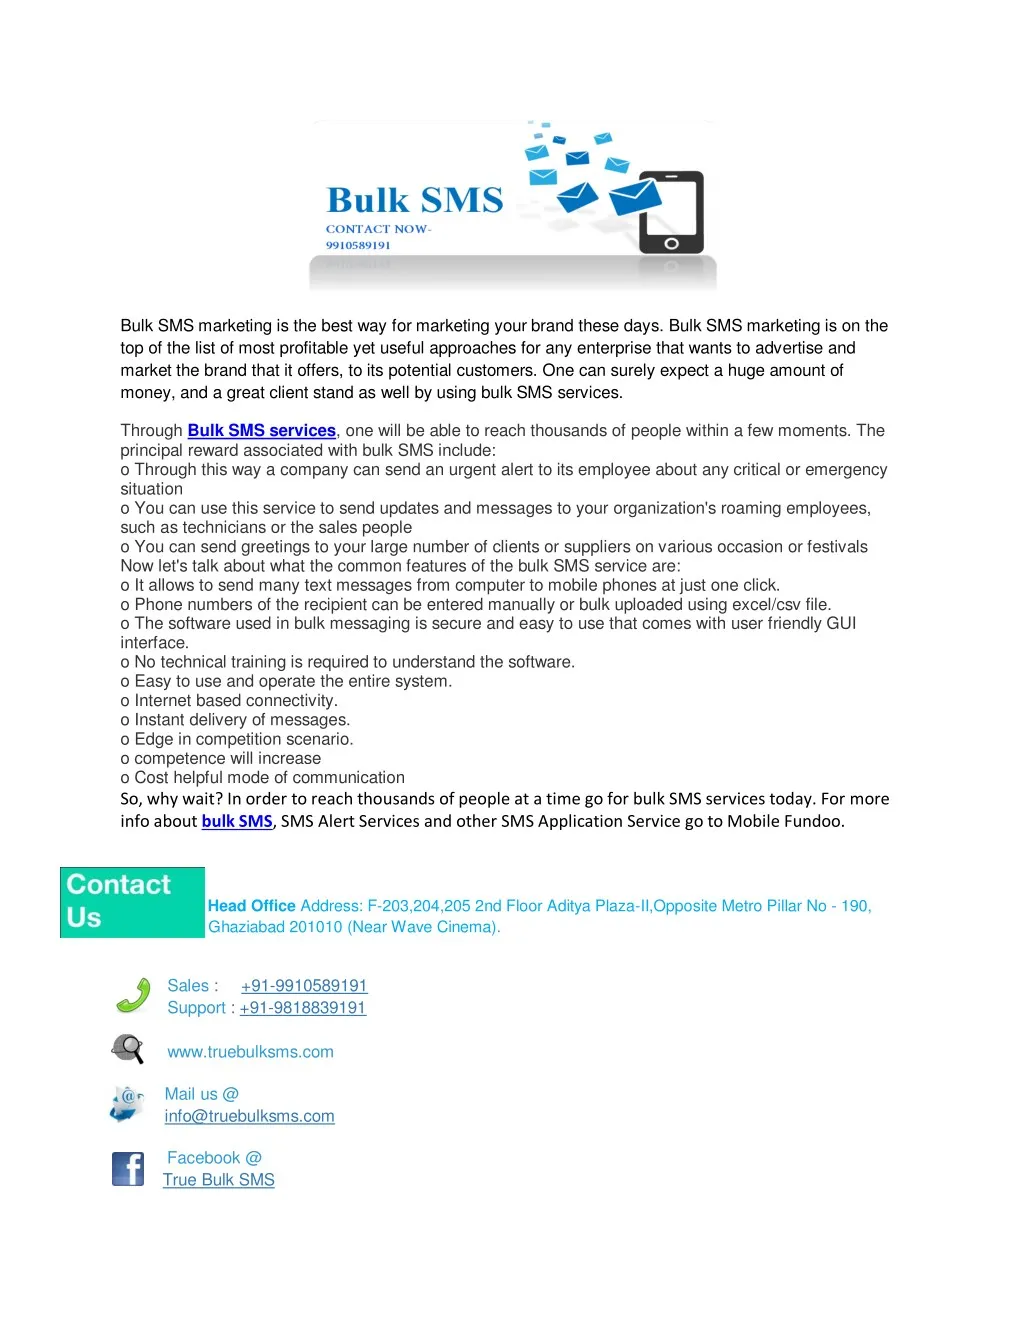 bulk sms marketing is the best way for marketing